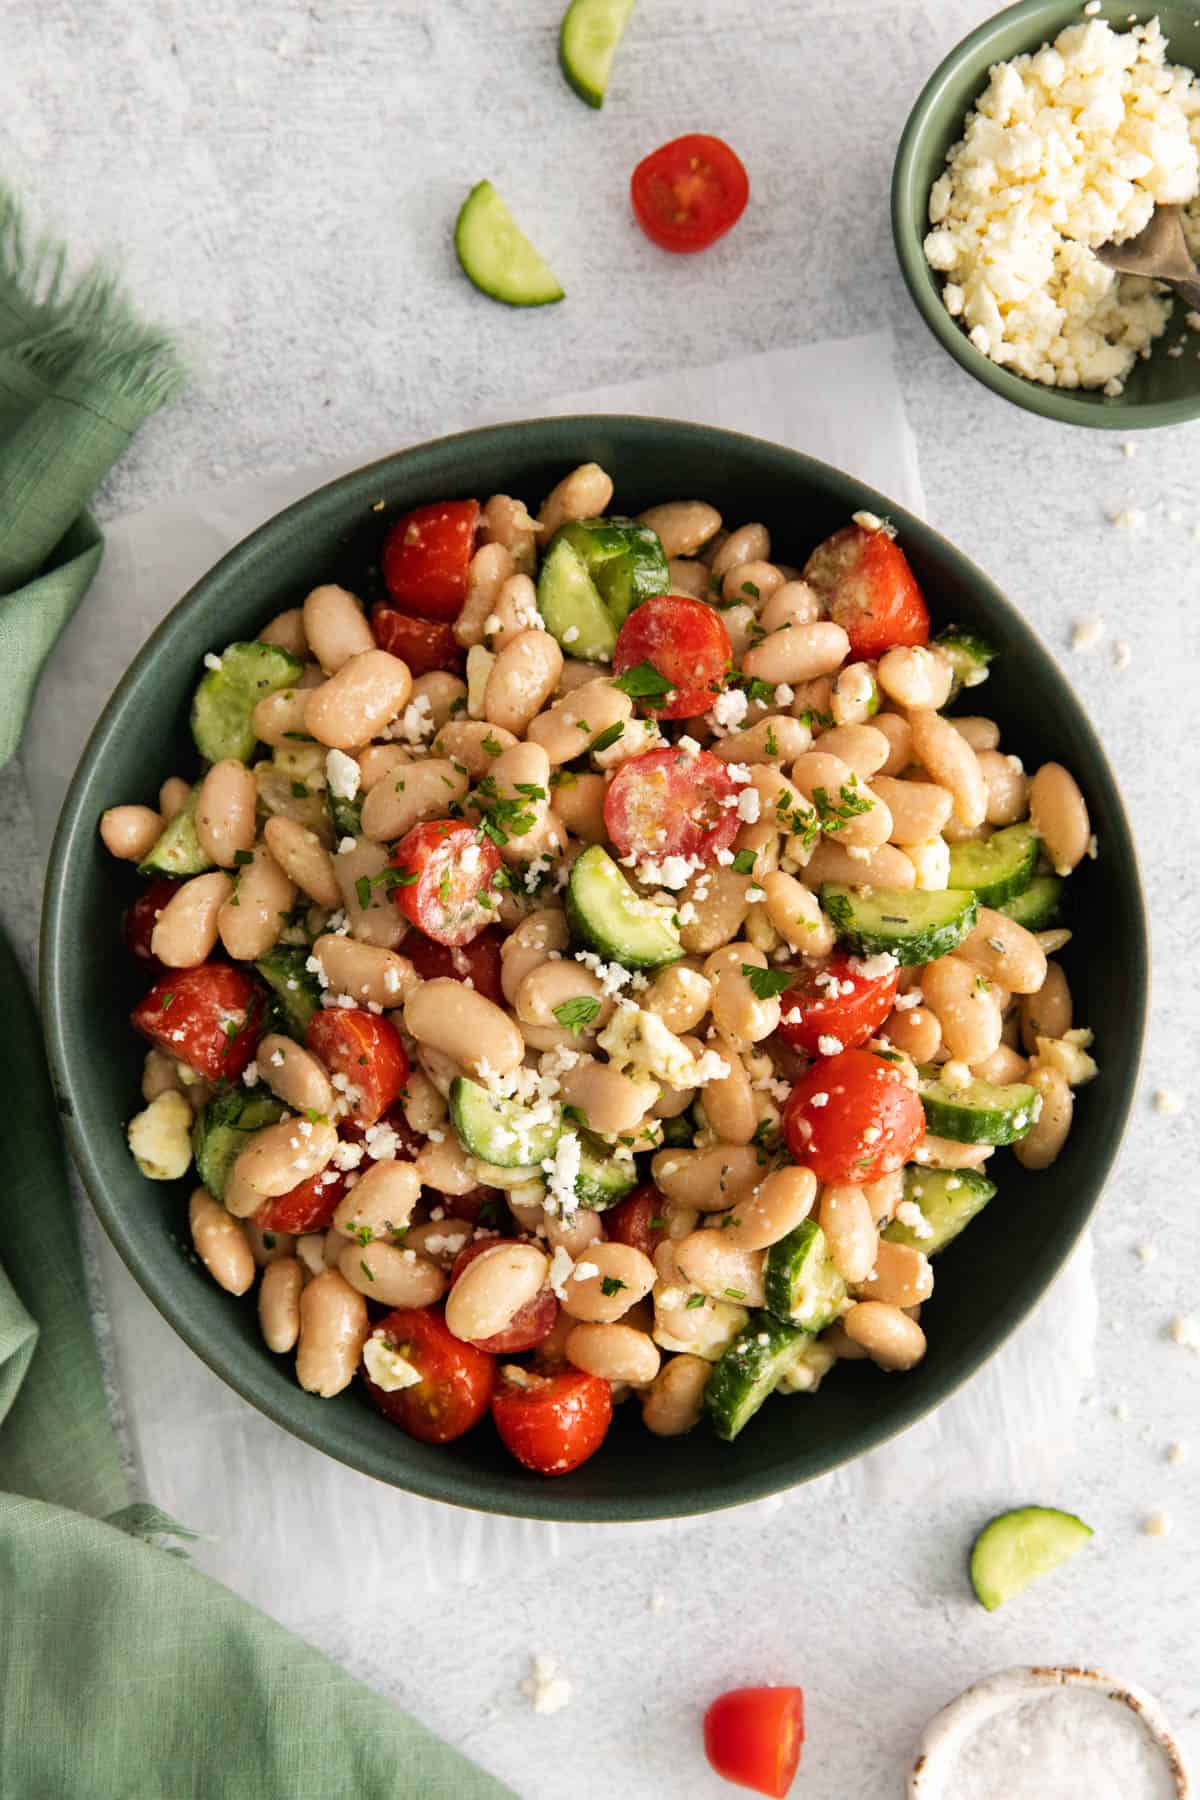 A green plate with a serving of Mediterranean white bean salad with cucumbers and tomatoes.